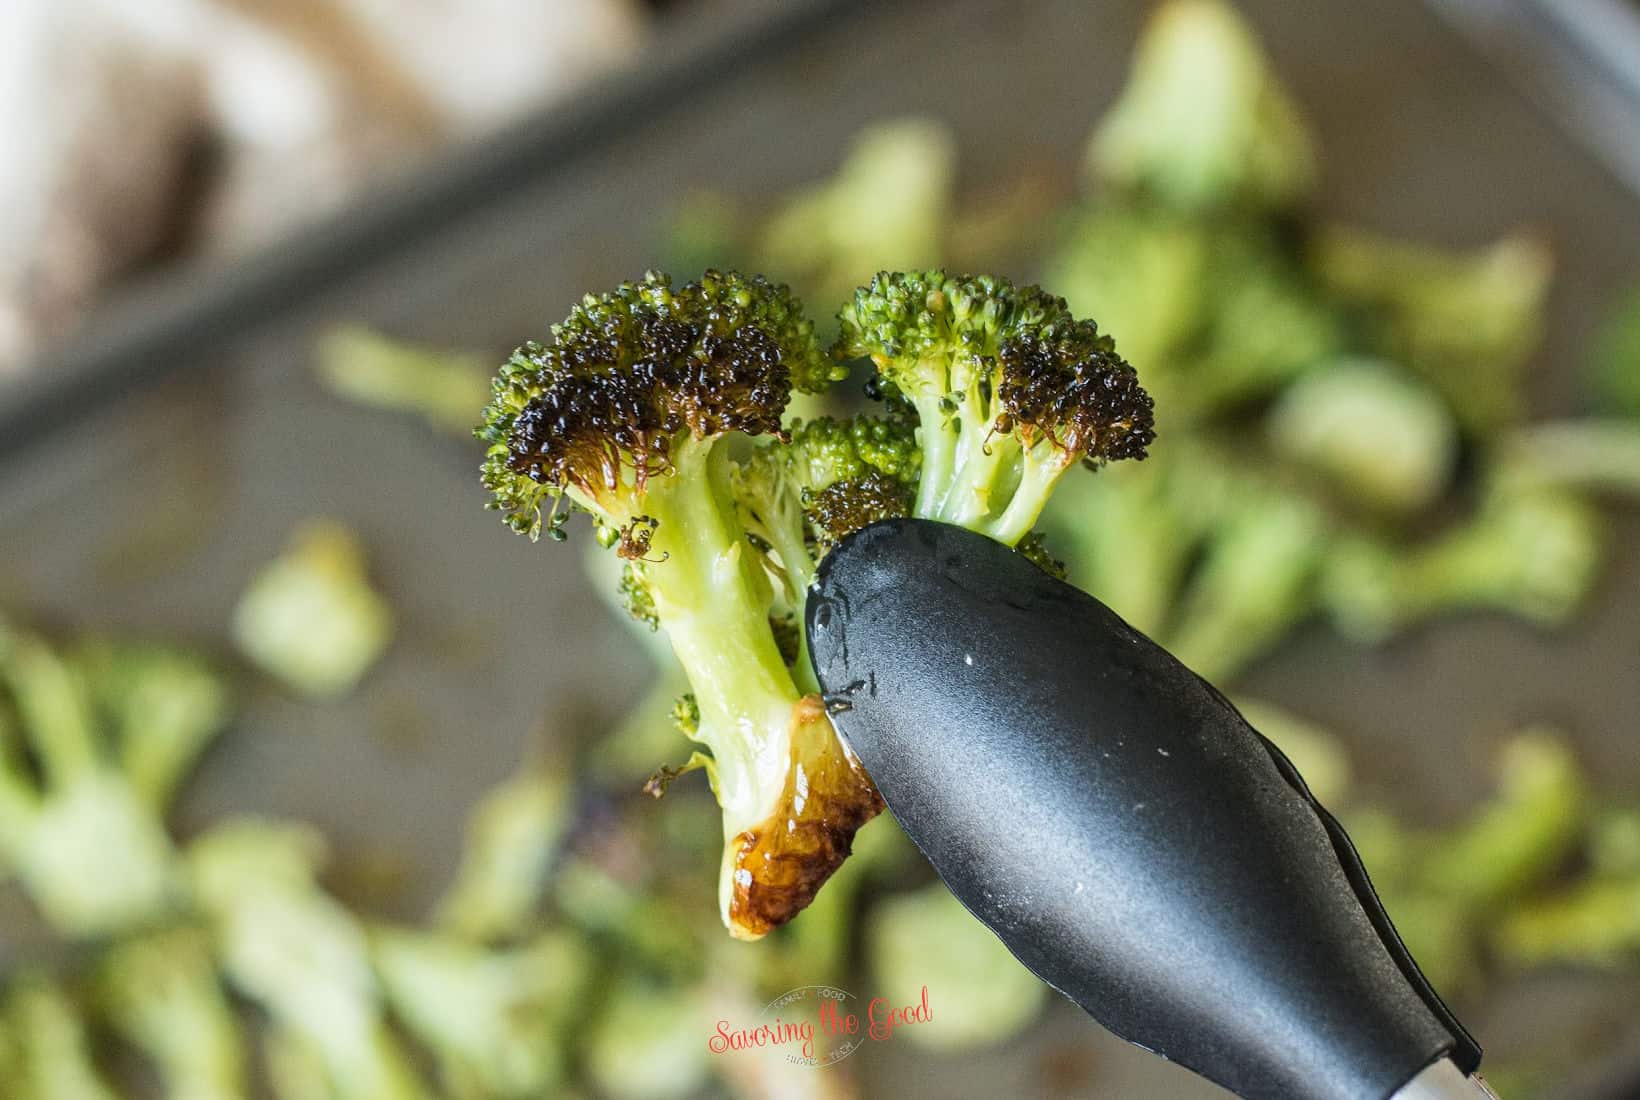 tongs holding a piece of pan roasted broccoli